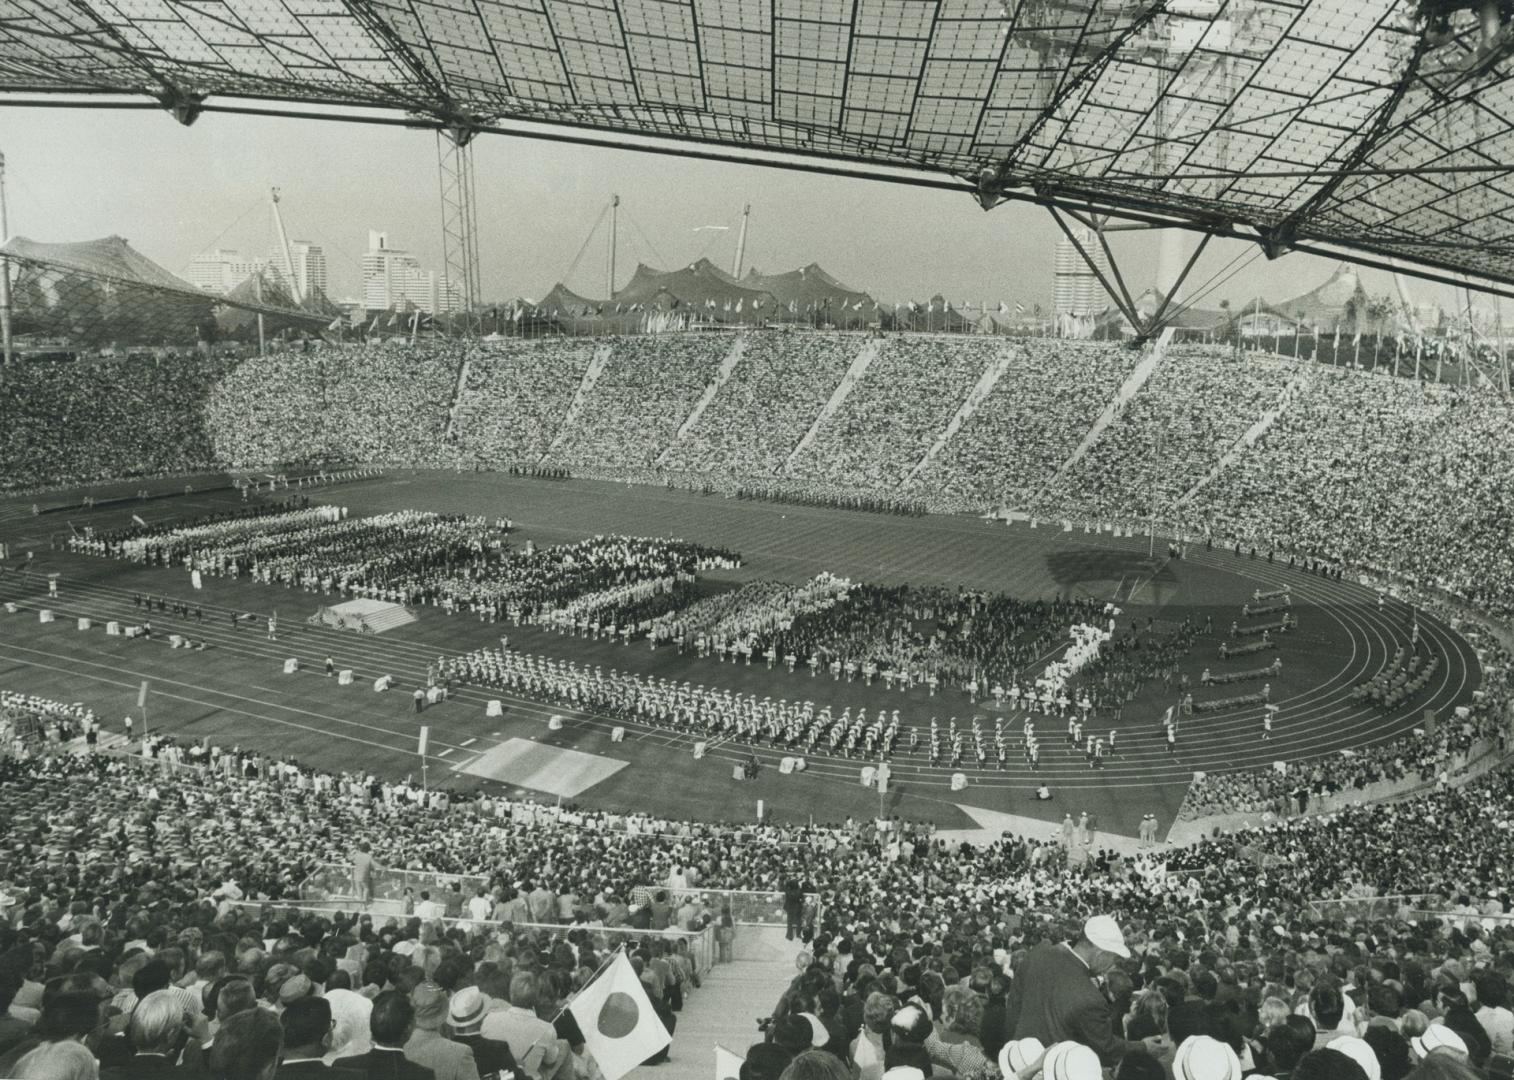 An image of peace and prospertiy was what Germany wanted to project in staging the Munich Olympics-a festival that would obliterate memories of the Na(...)